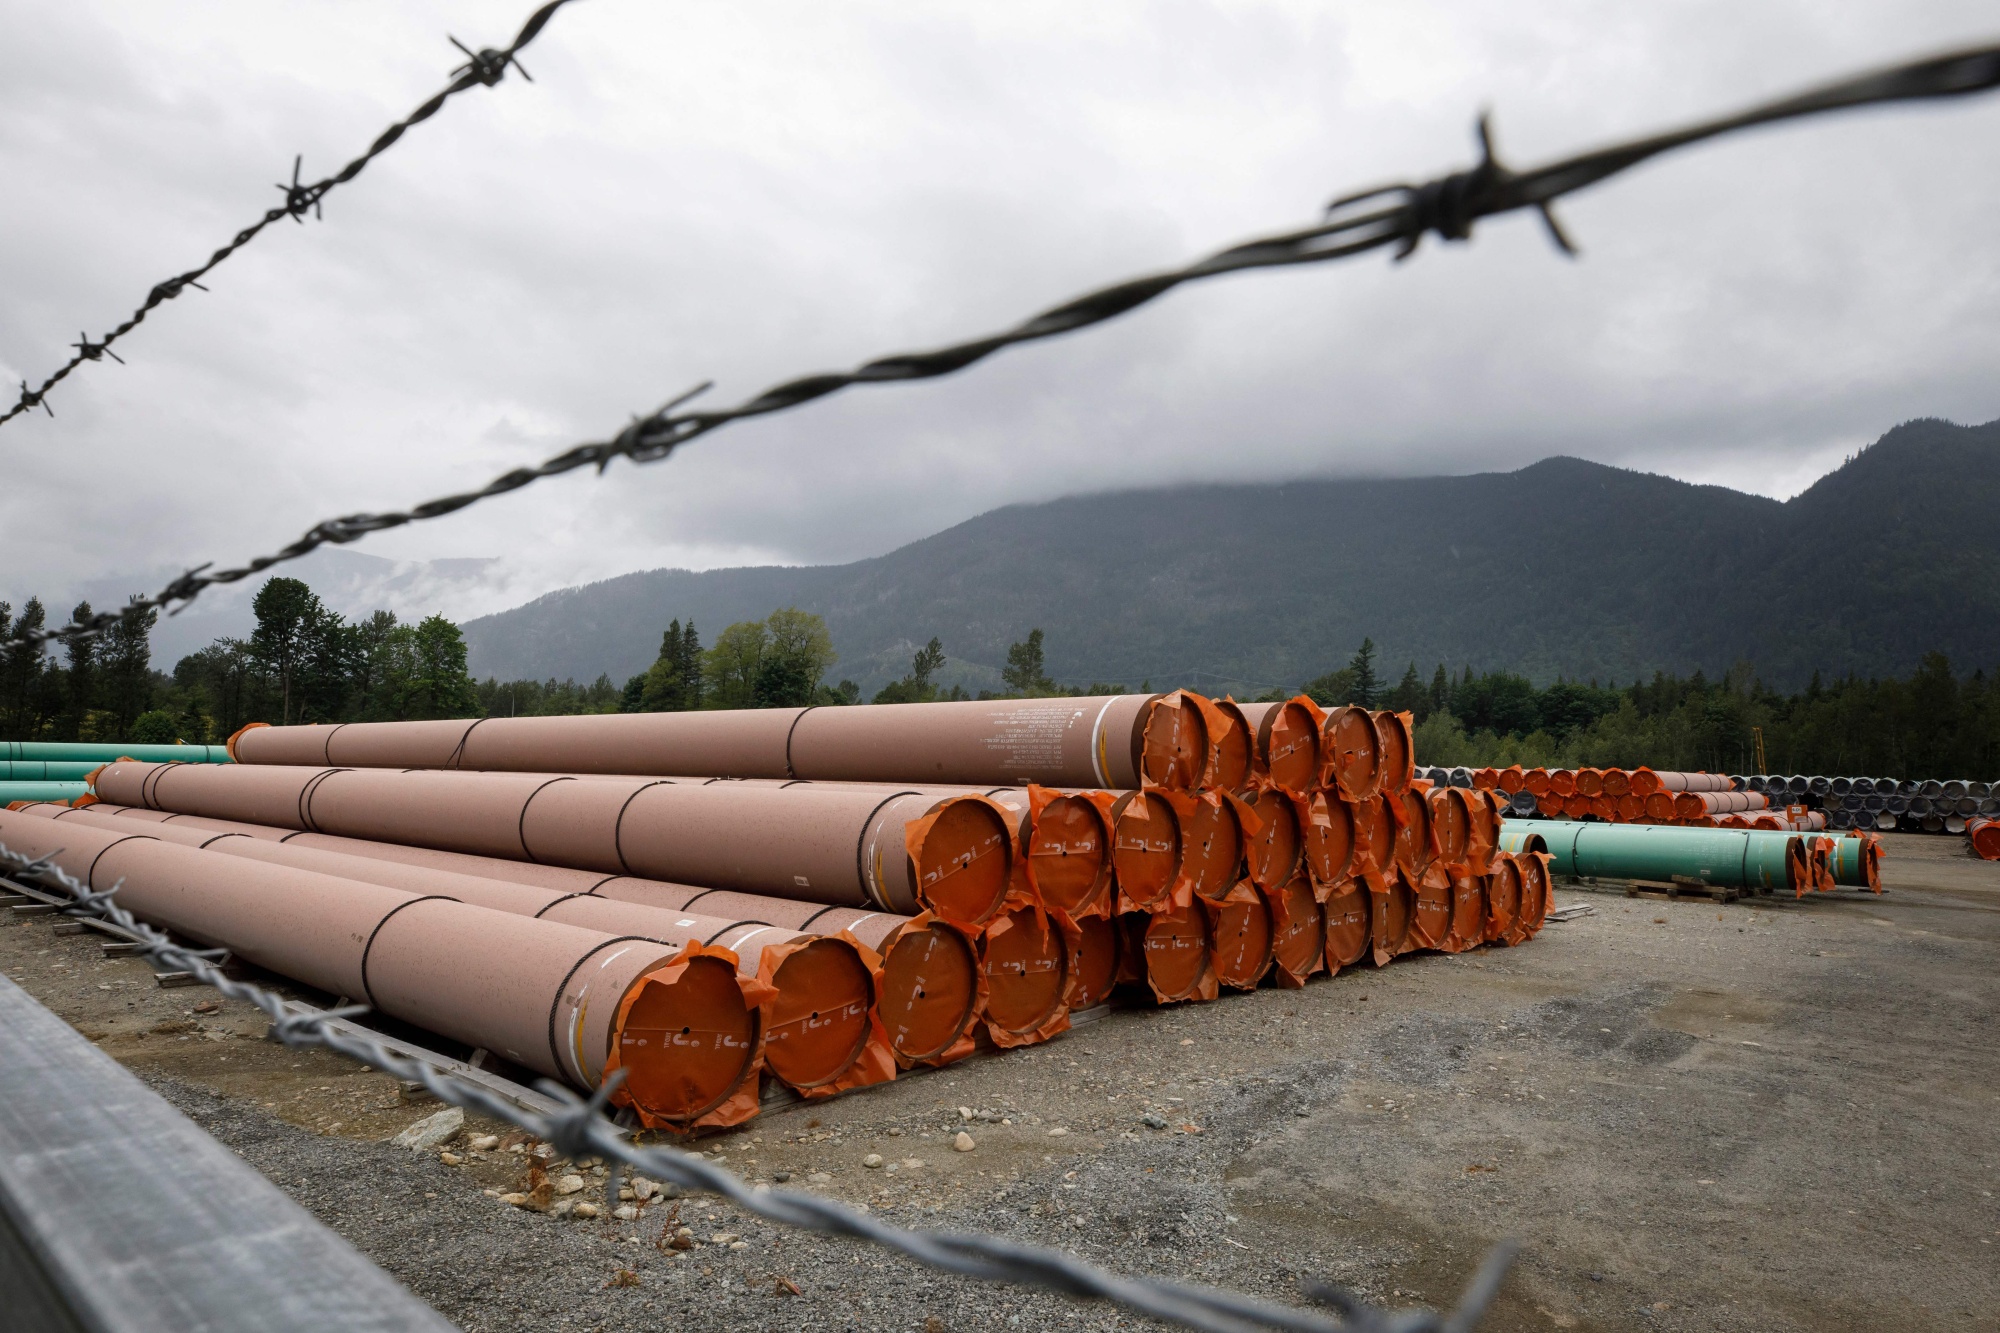 Pieces of the Trans Mountain pipeline project sit in a storage lot outside of Hope, British Columbia, during construction in 2021.